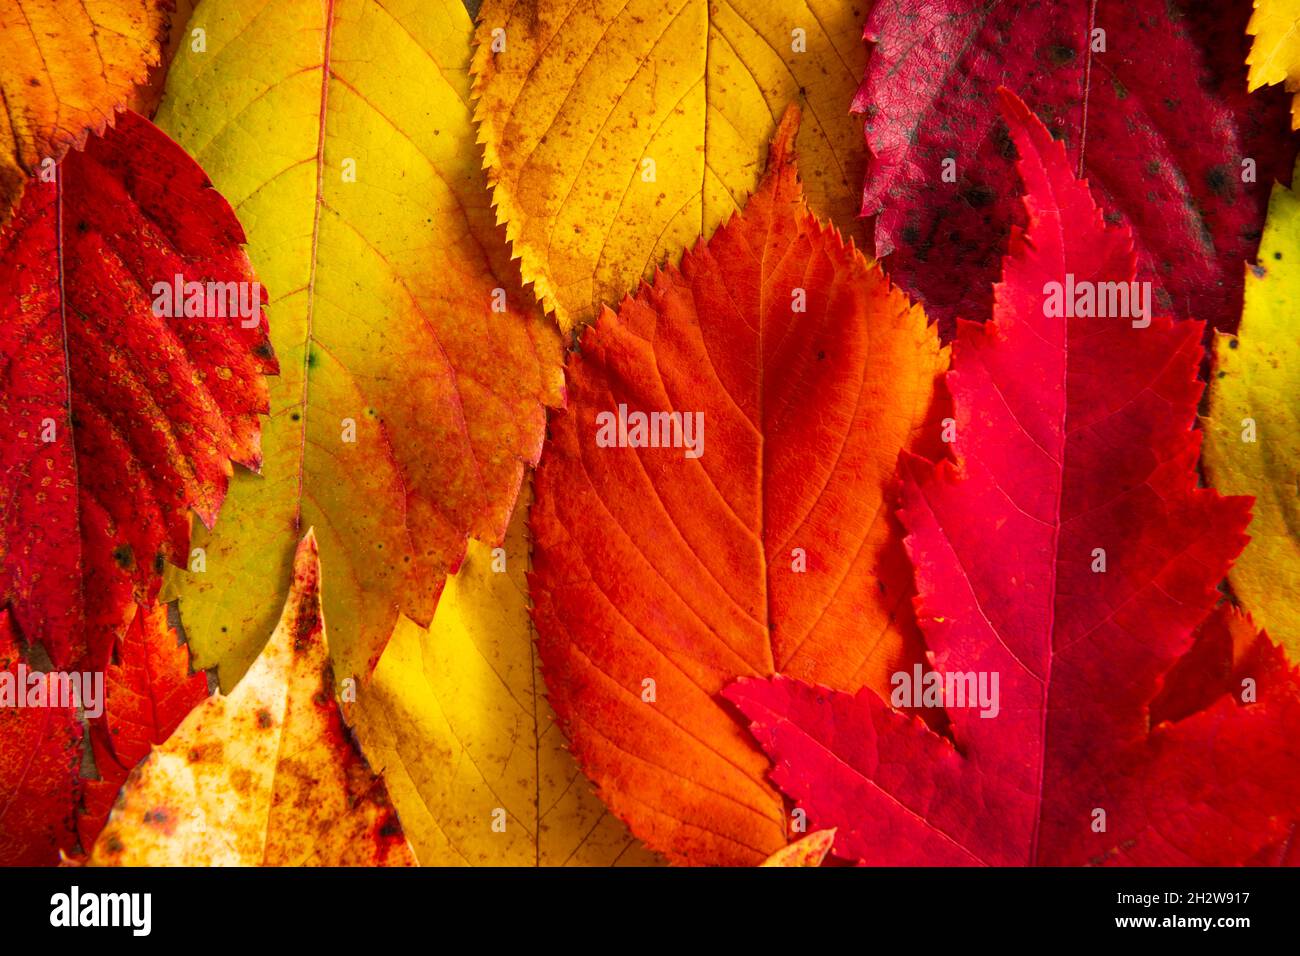 Different colored autumn leaves Stock Photo